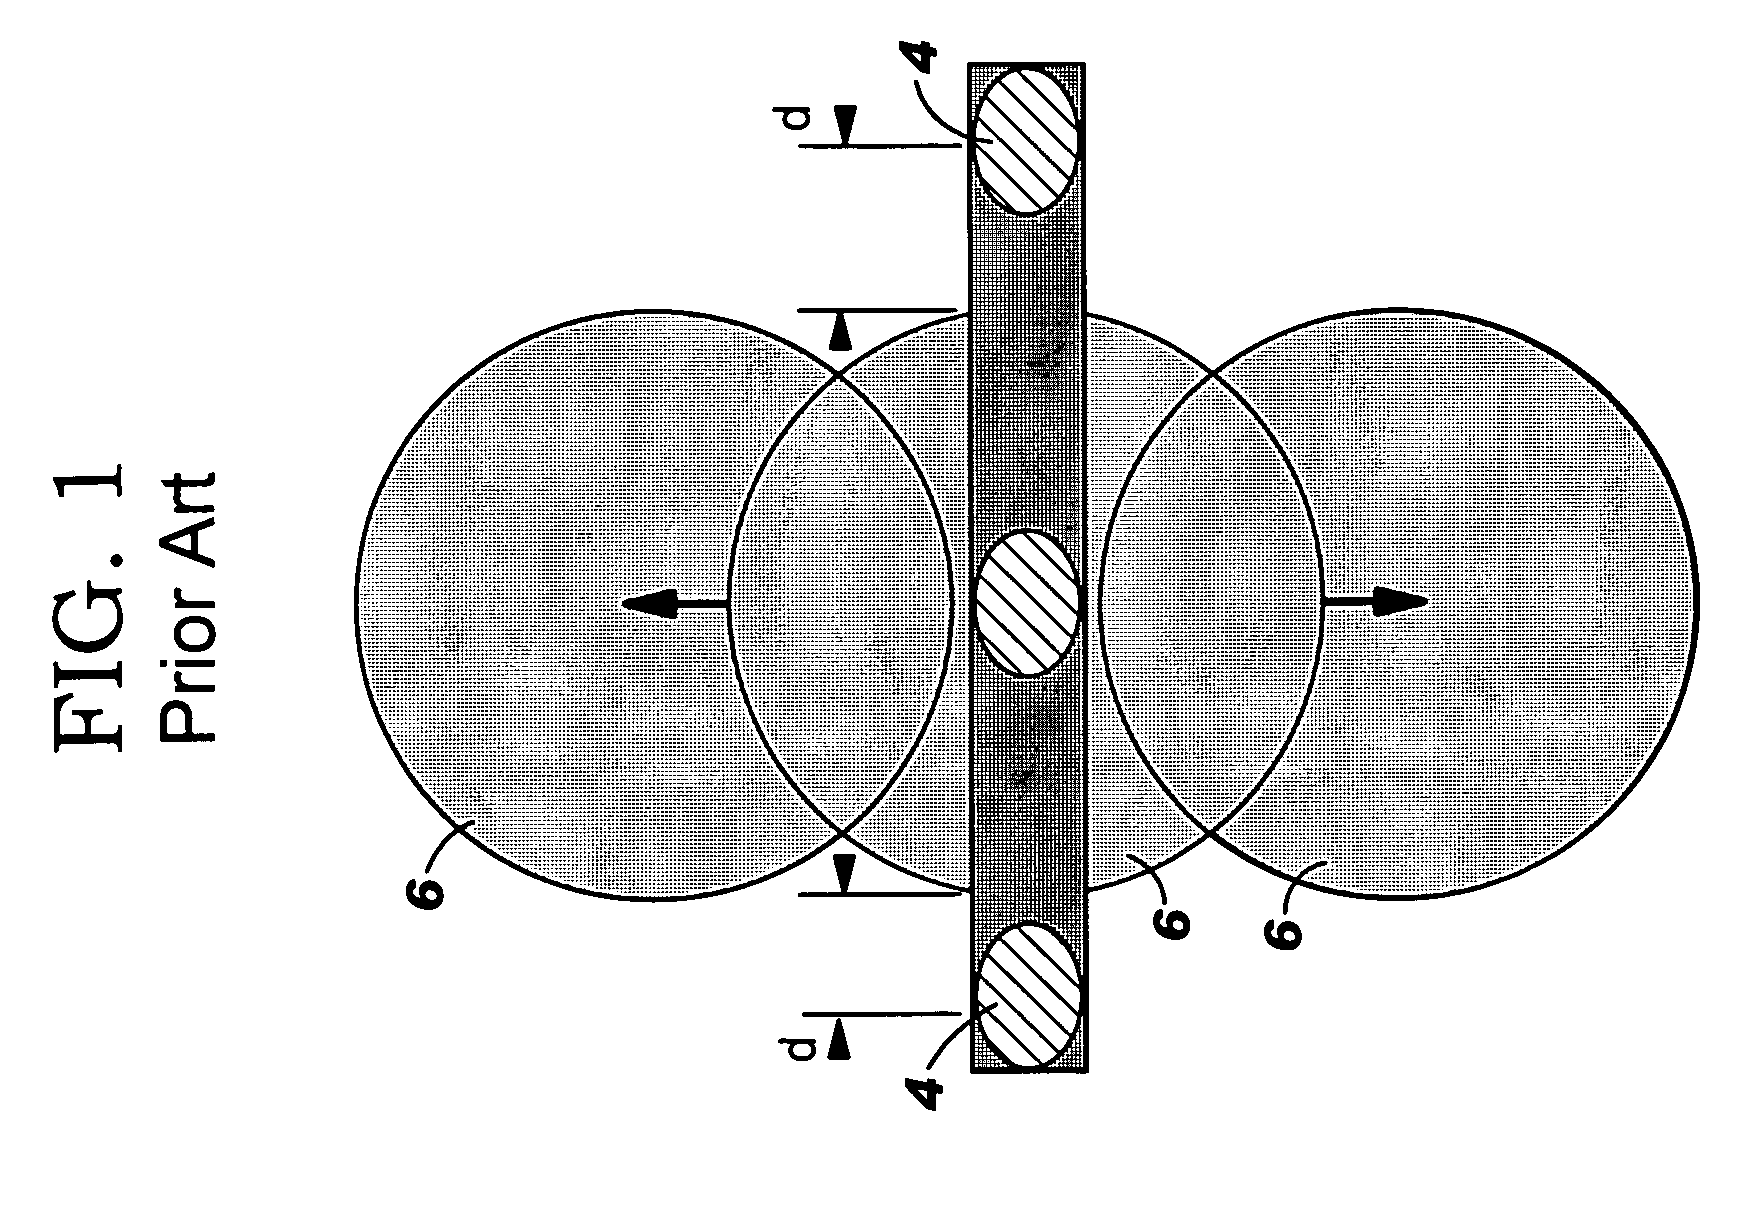 Ion beam implant current, spot width and position tuning